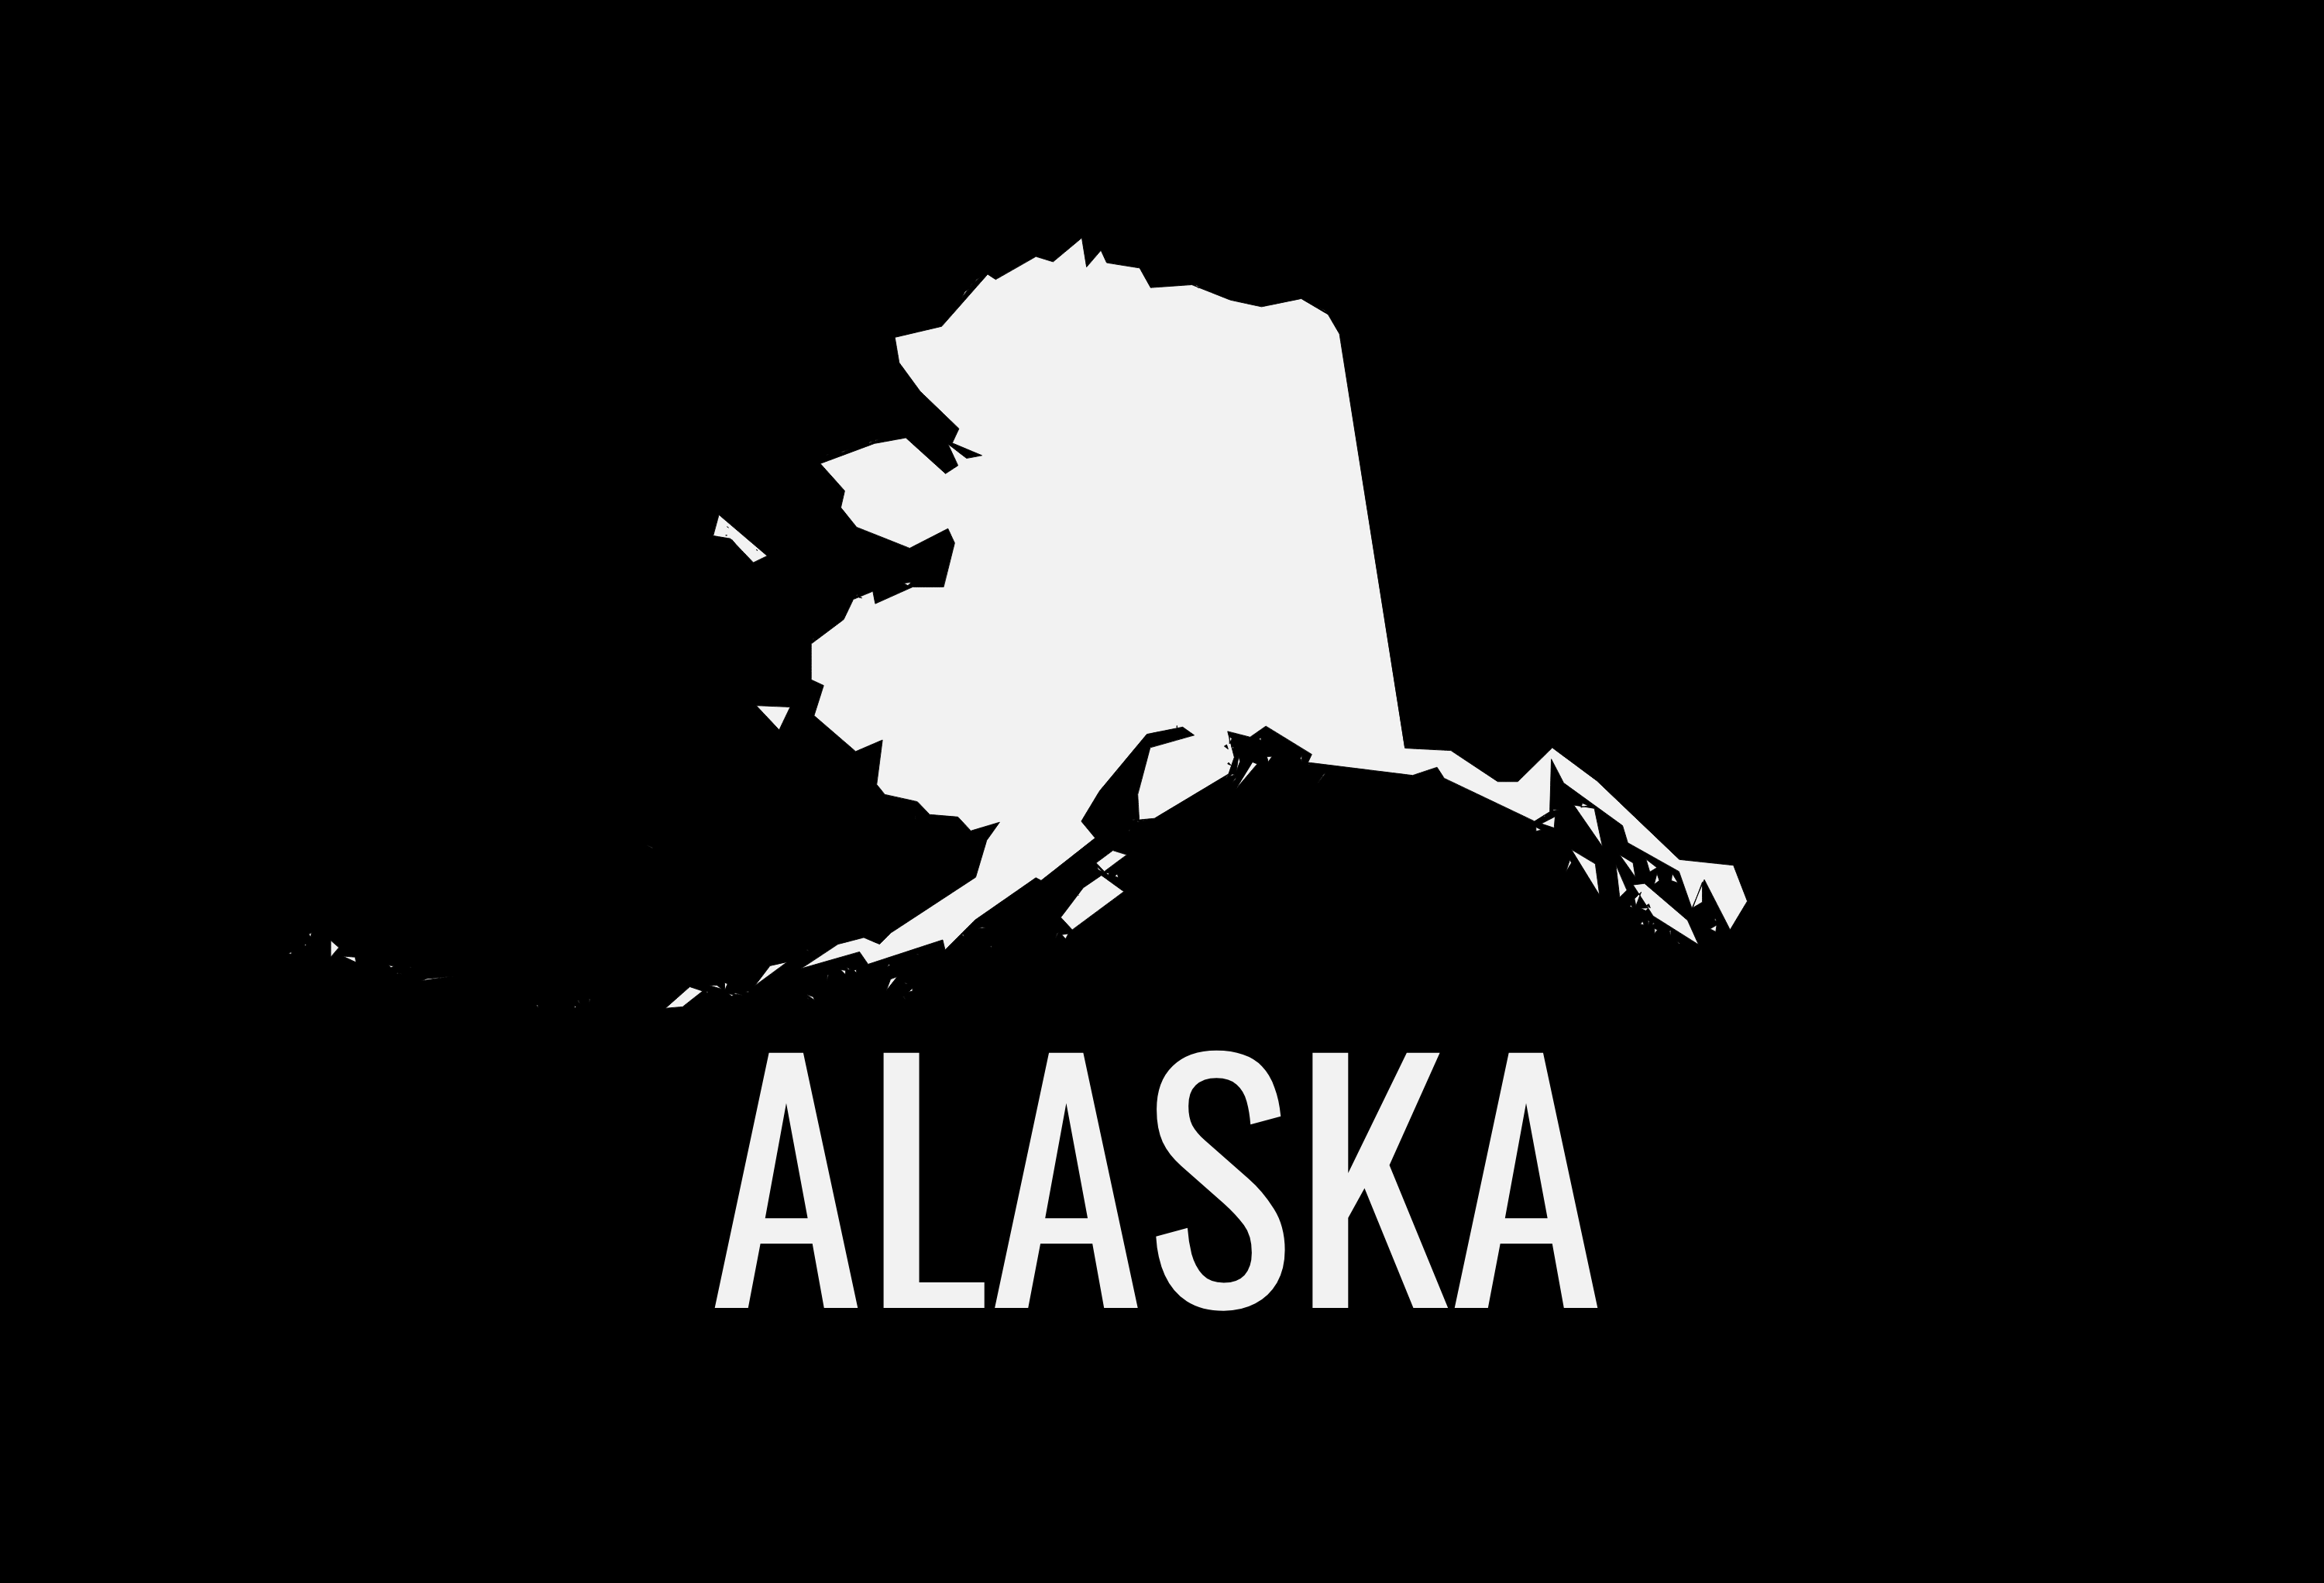 Alaska State Map Car Decal - Permanent Vinyl Sticker for Cars, Vehicle, Doors, Windows, Laptop, and more!